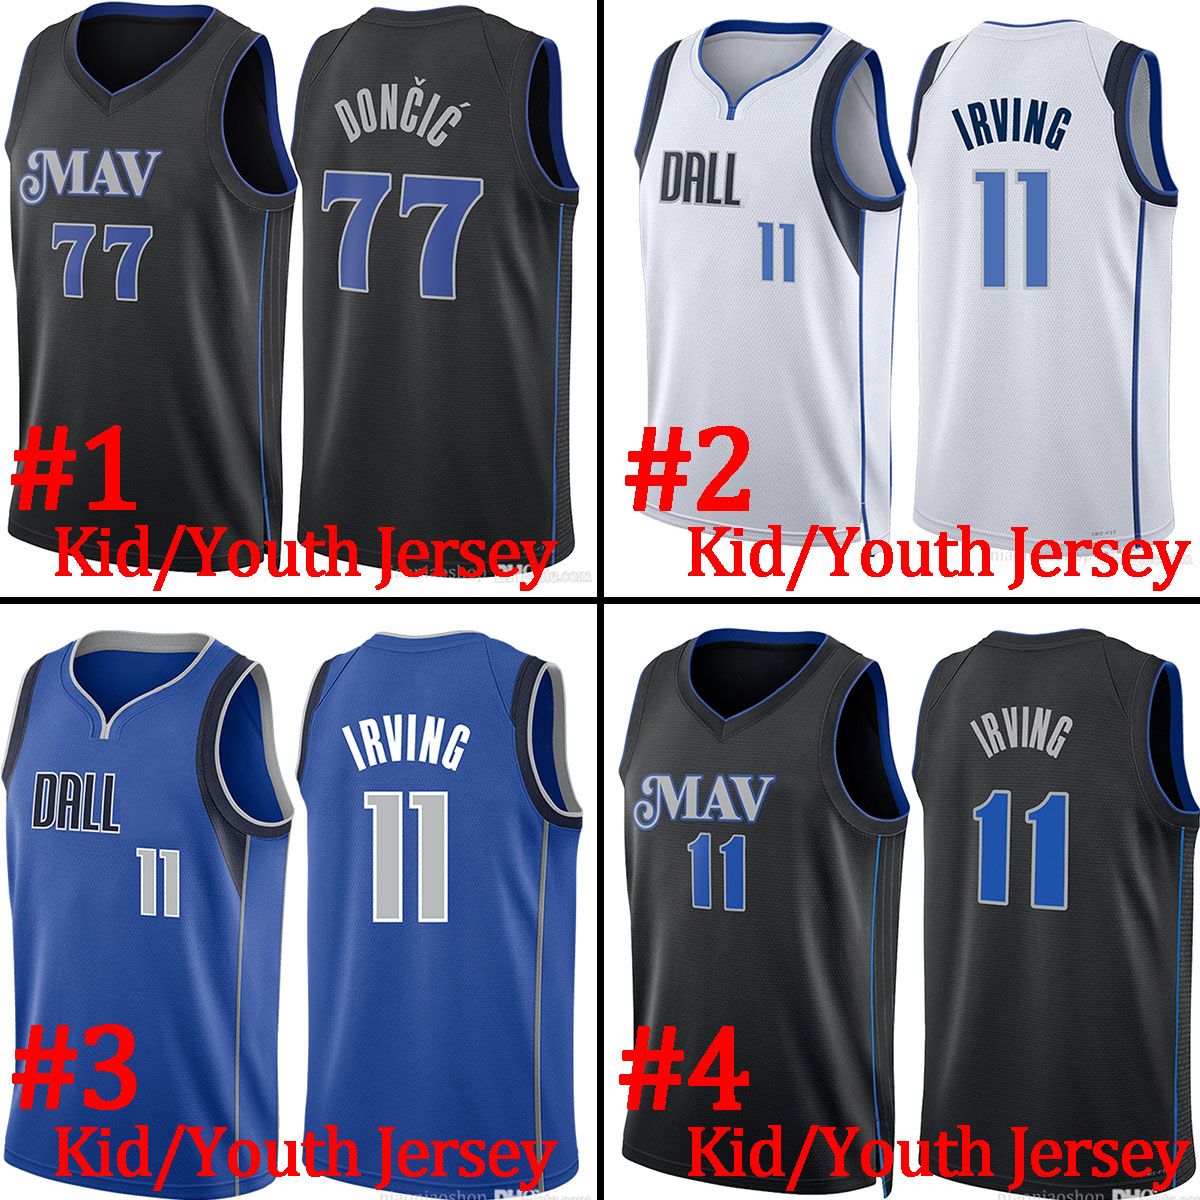 Youth/Kid Jersey-6